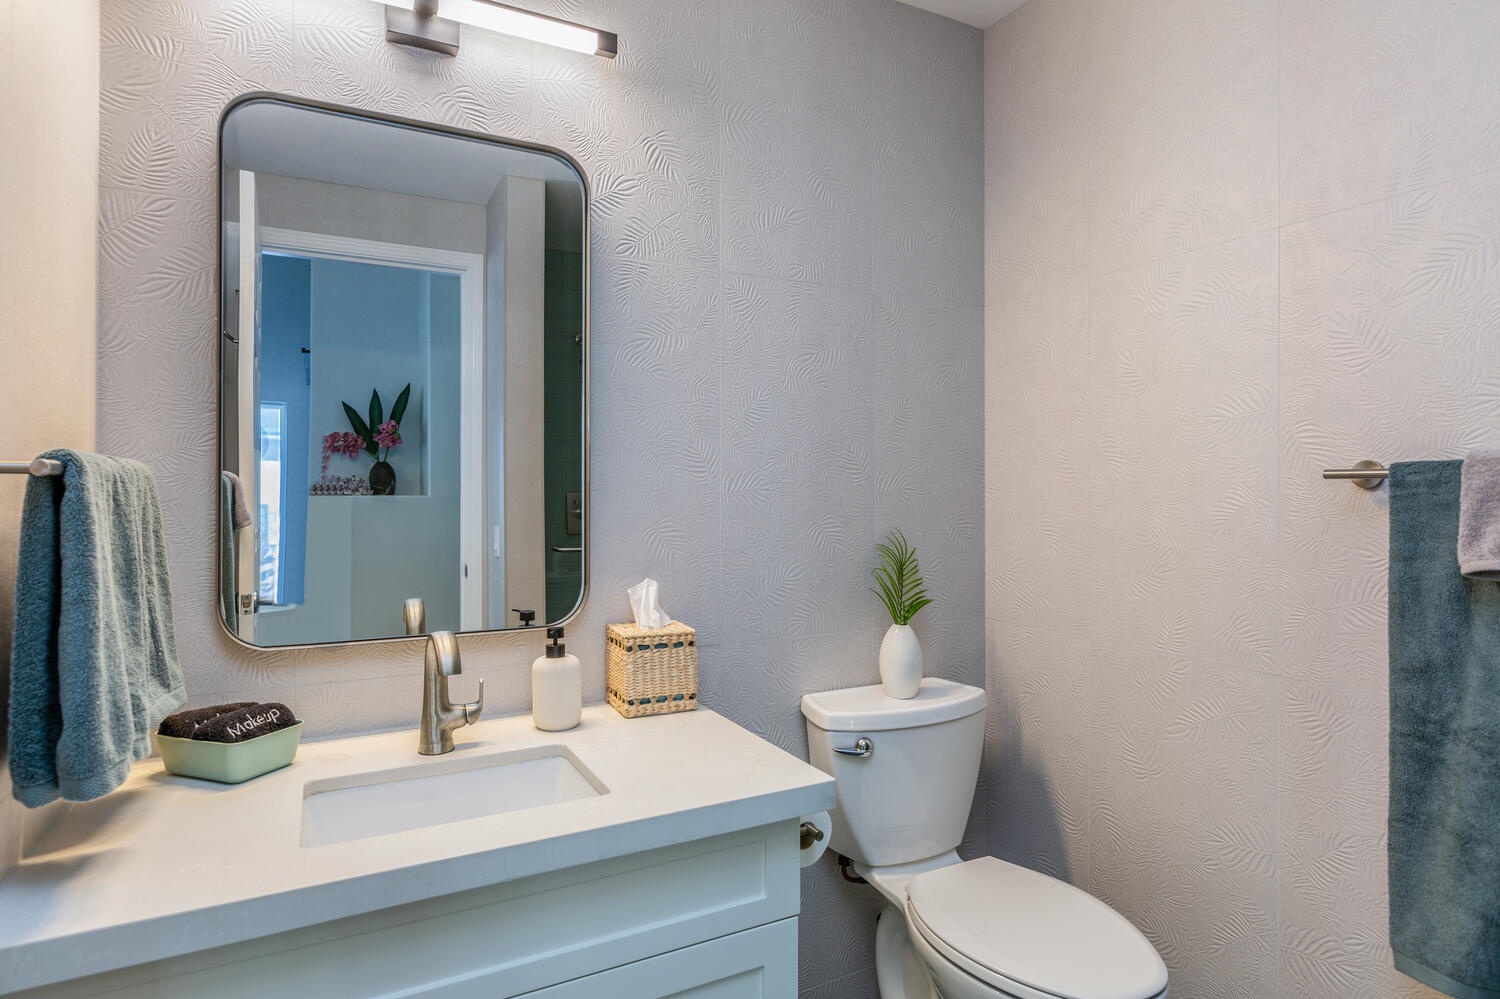 Princeville Vacation Rentals, Sea Glass - With a single vanity area.